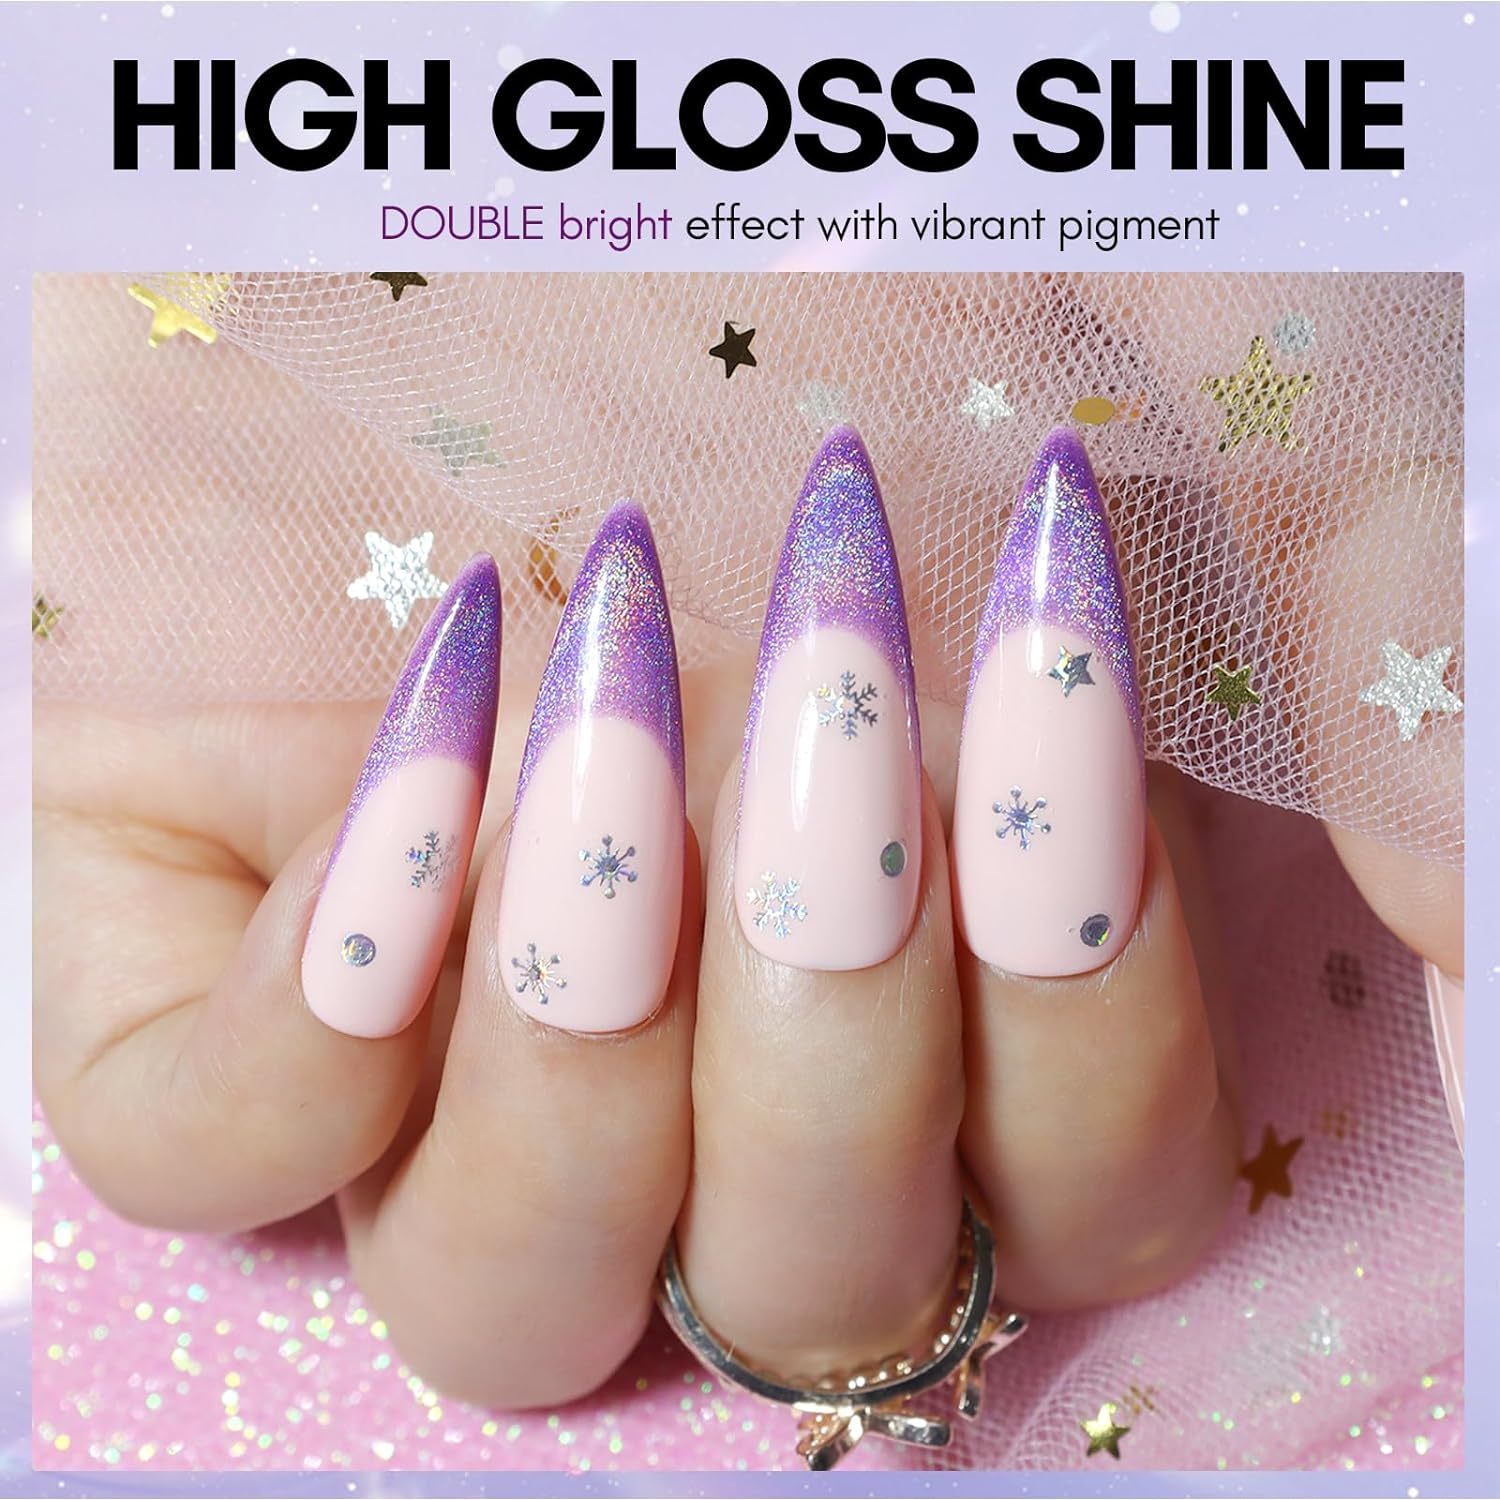 Glitter Gel Nail Designs For Quick Nails For Spring 2020 : r/Nails